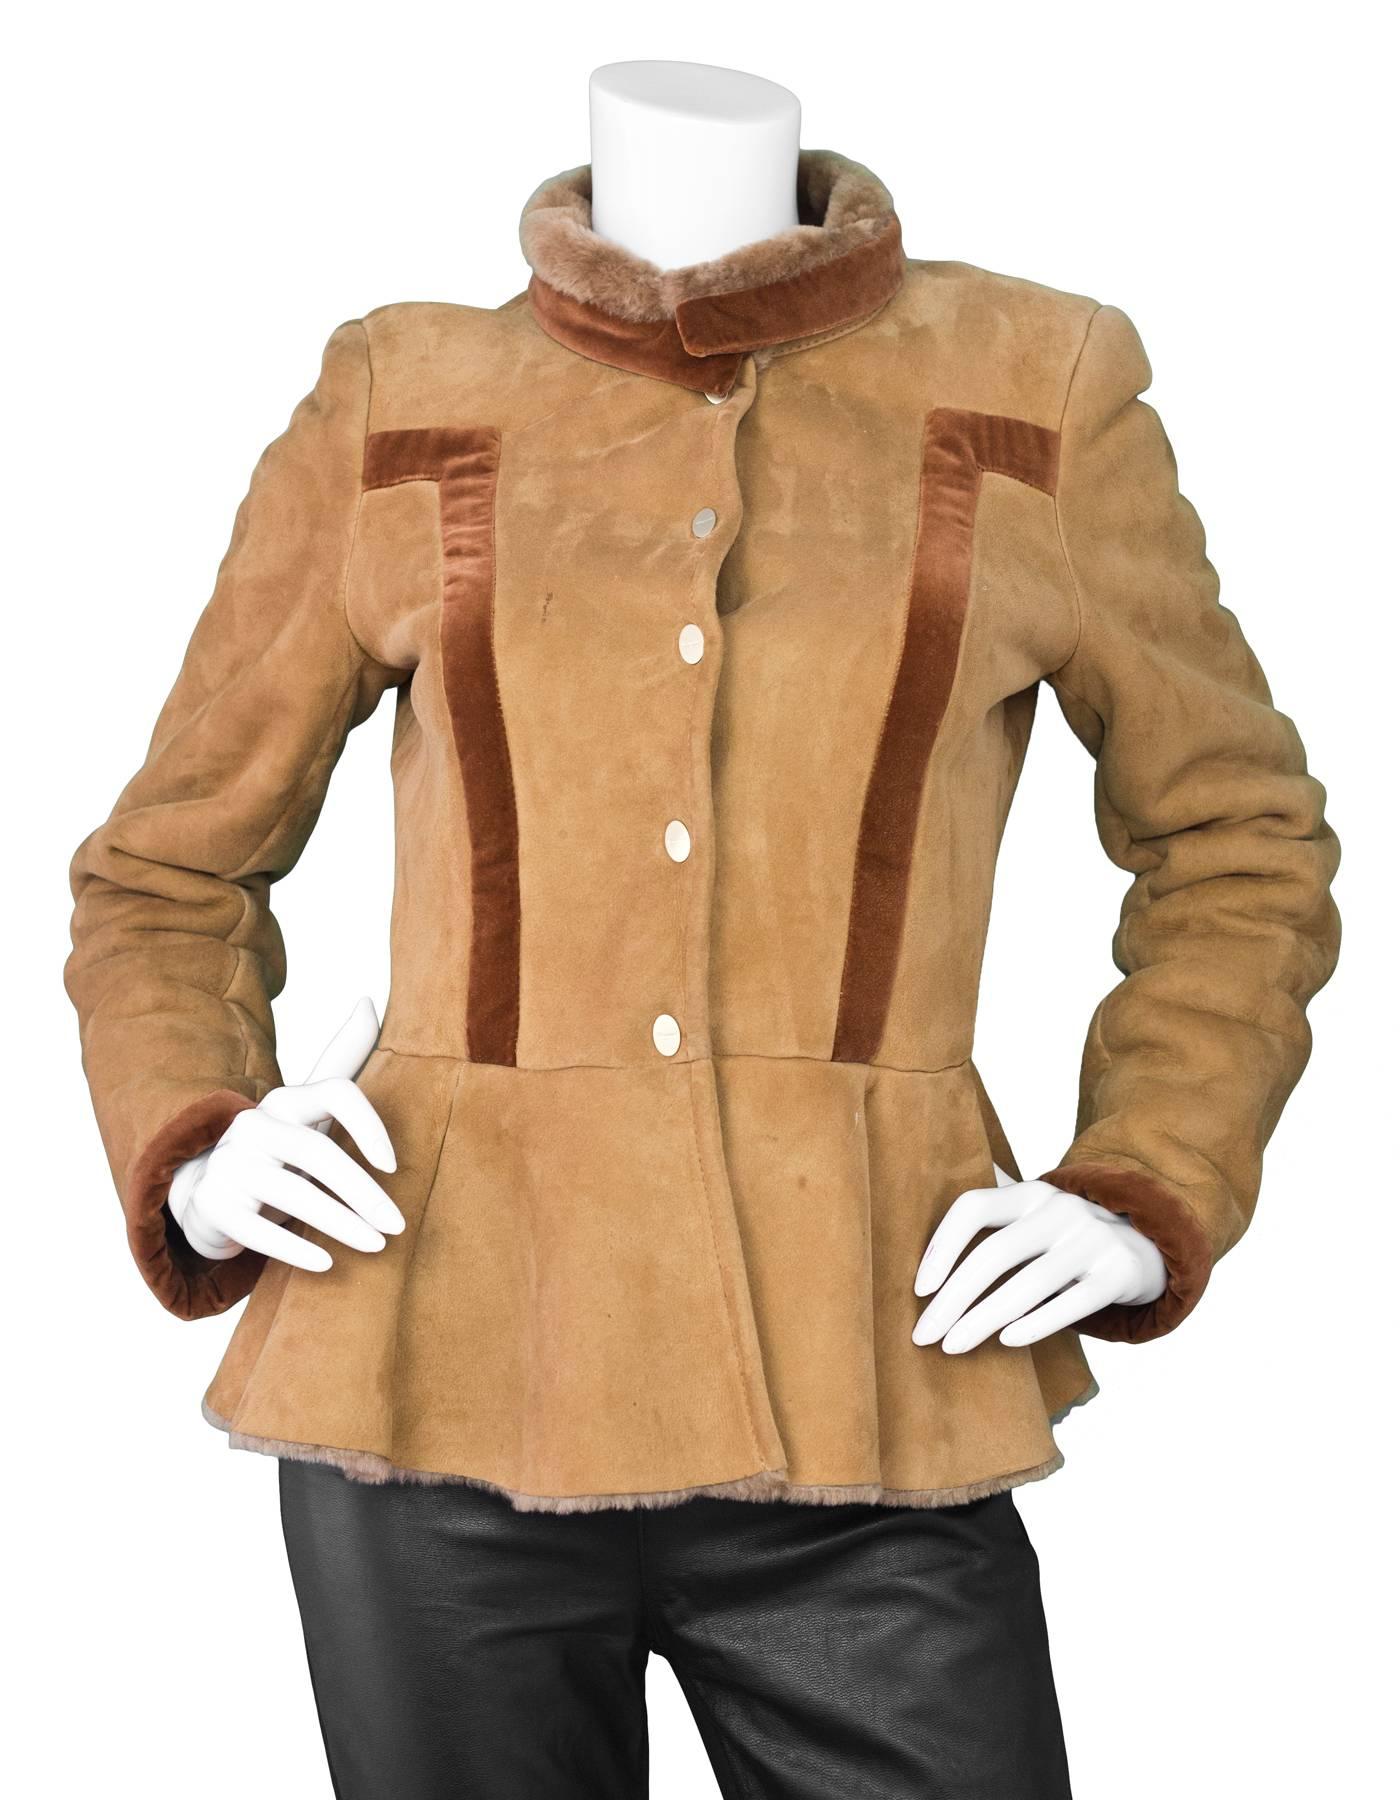 Salvatore Ferragamo Camel Shearling Jacket Sz 8
Features peplum hemline

Made In: Italy
Color: Camel
Composition: 82% Cotton, 18% modal
Closure/Opening: Front snap button closure
Exterior Pockets: Nnoe
Interior Pockets: None
Overall Condition: